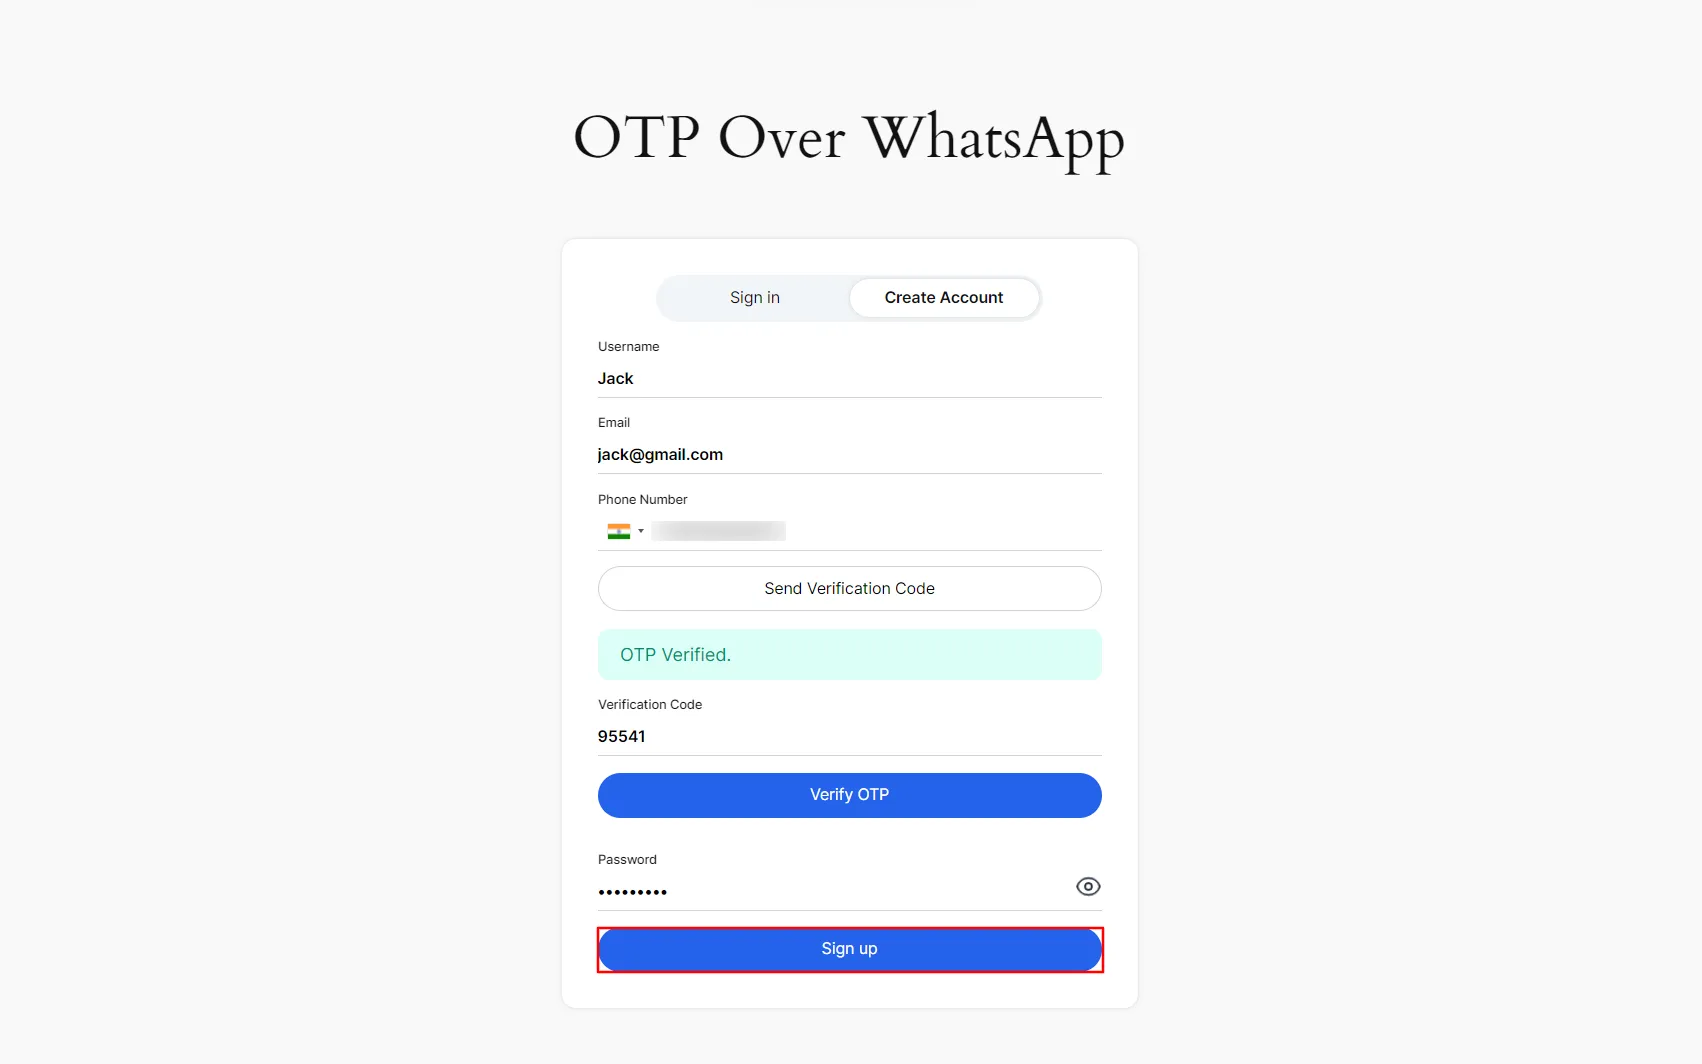 WhatsApp Login with OTP - Click Sign up